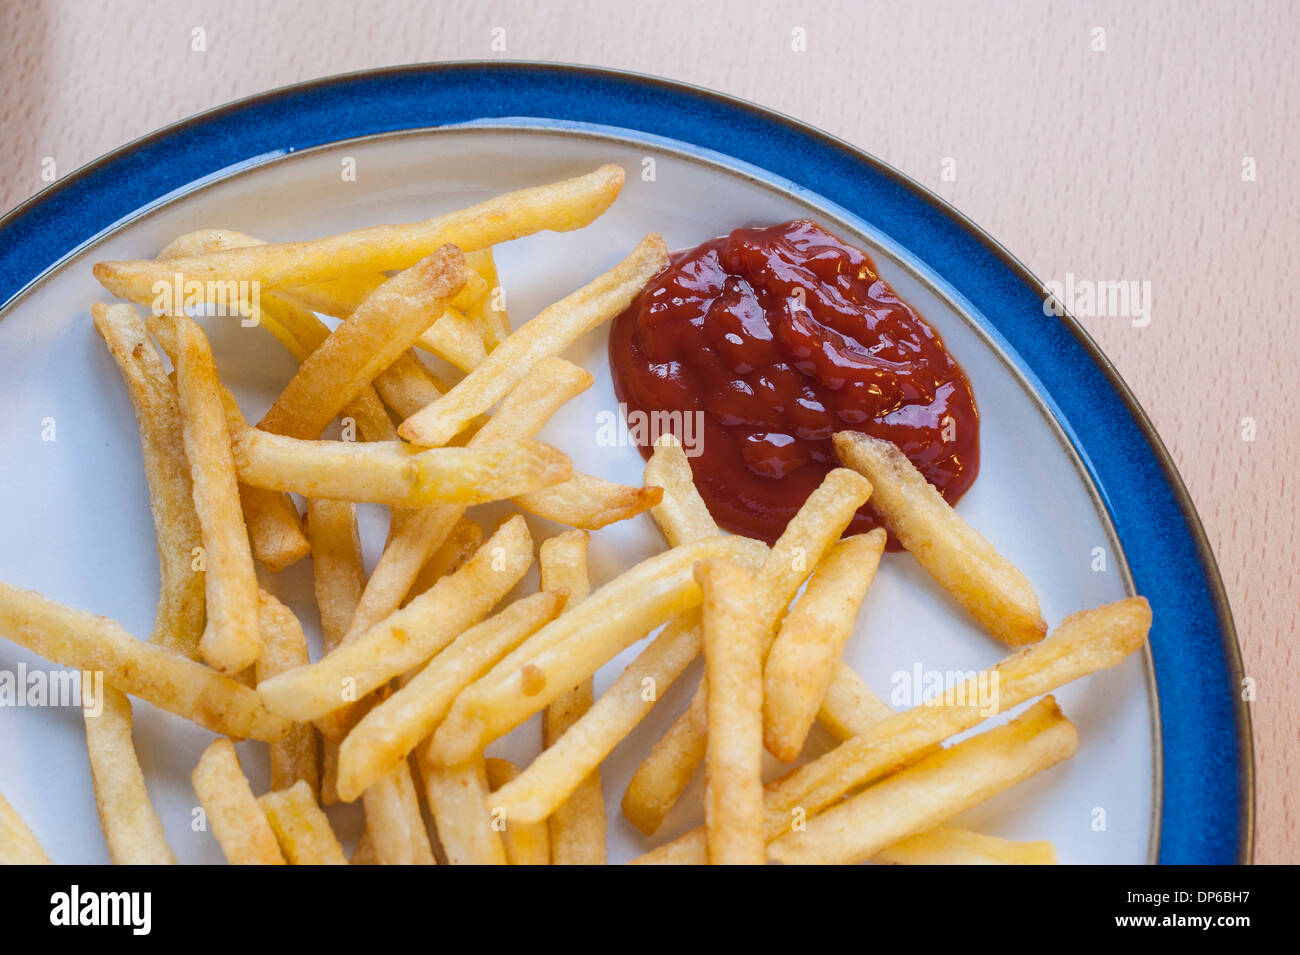 Potato chips on a plate with tomato ketchup sauce Stock Photo